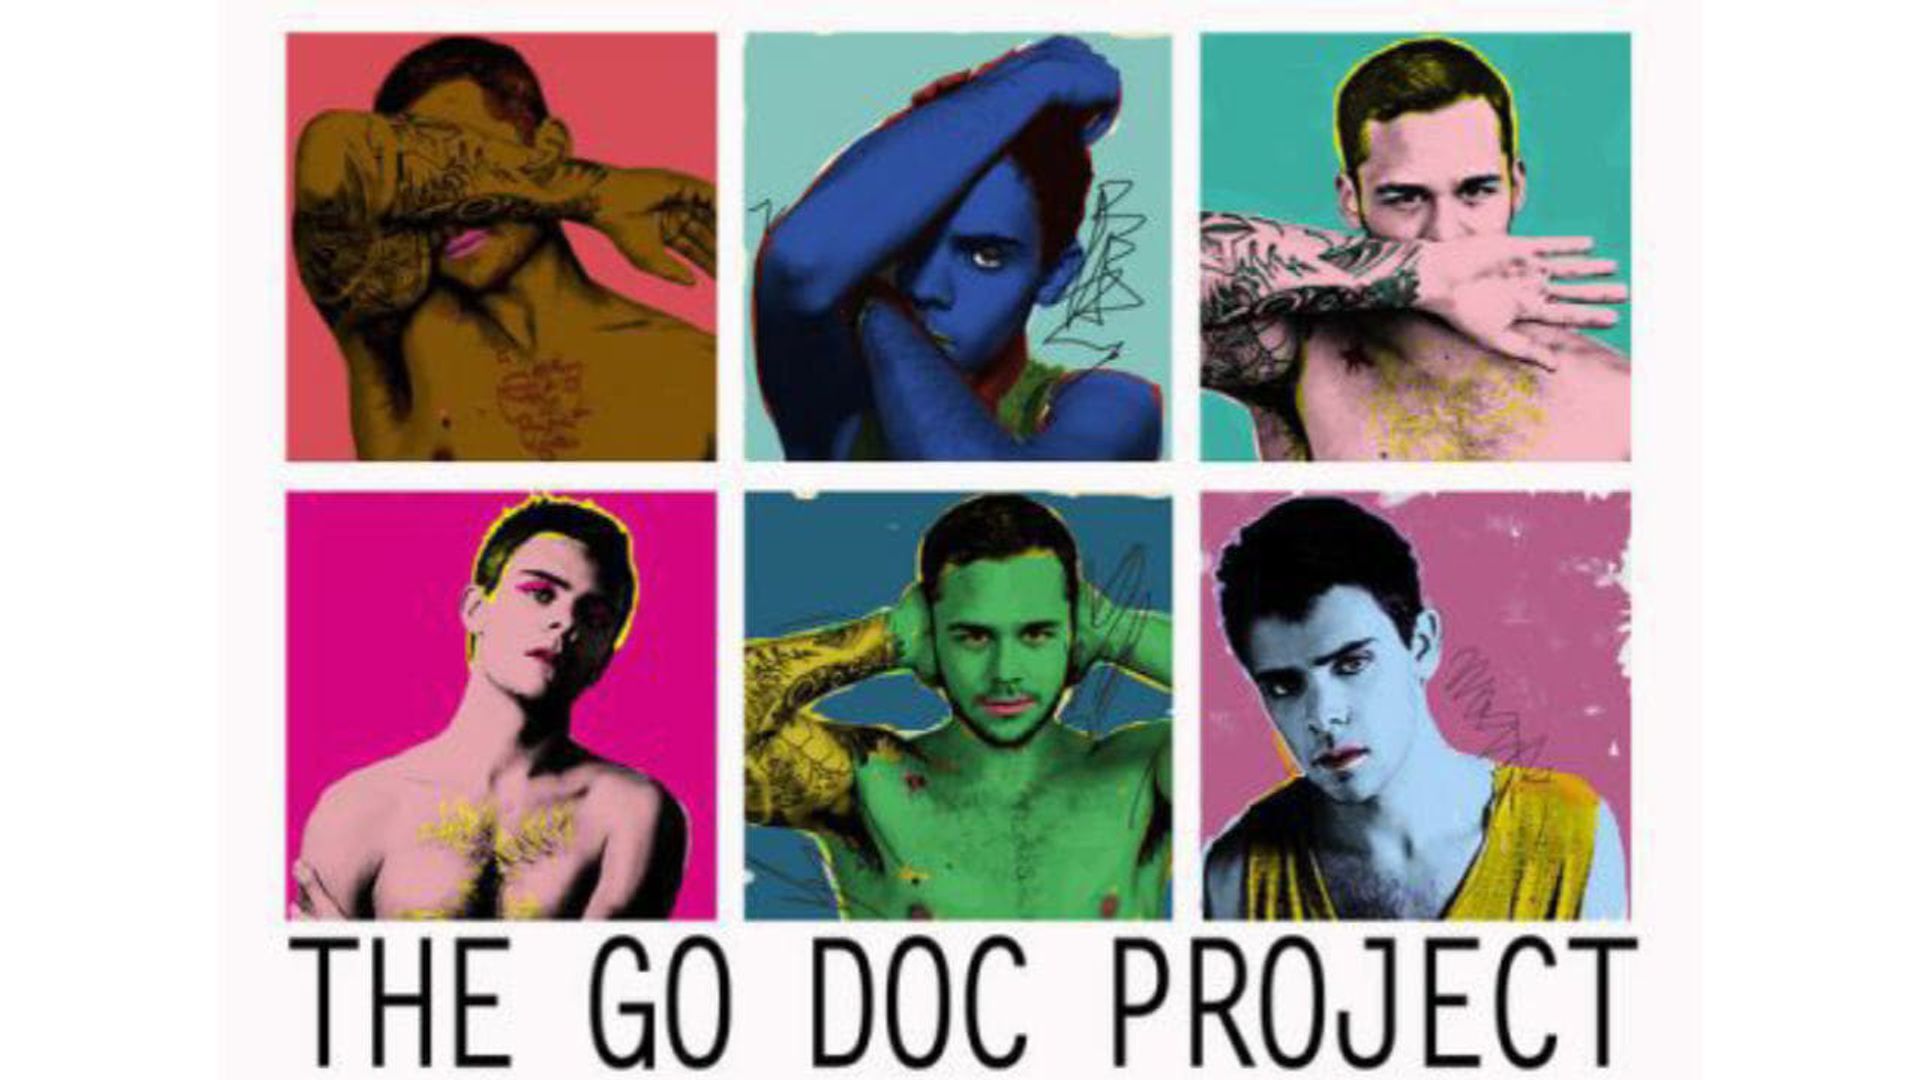 Getting Go, the Go Doc Project background